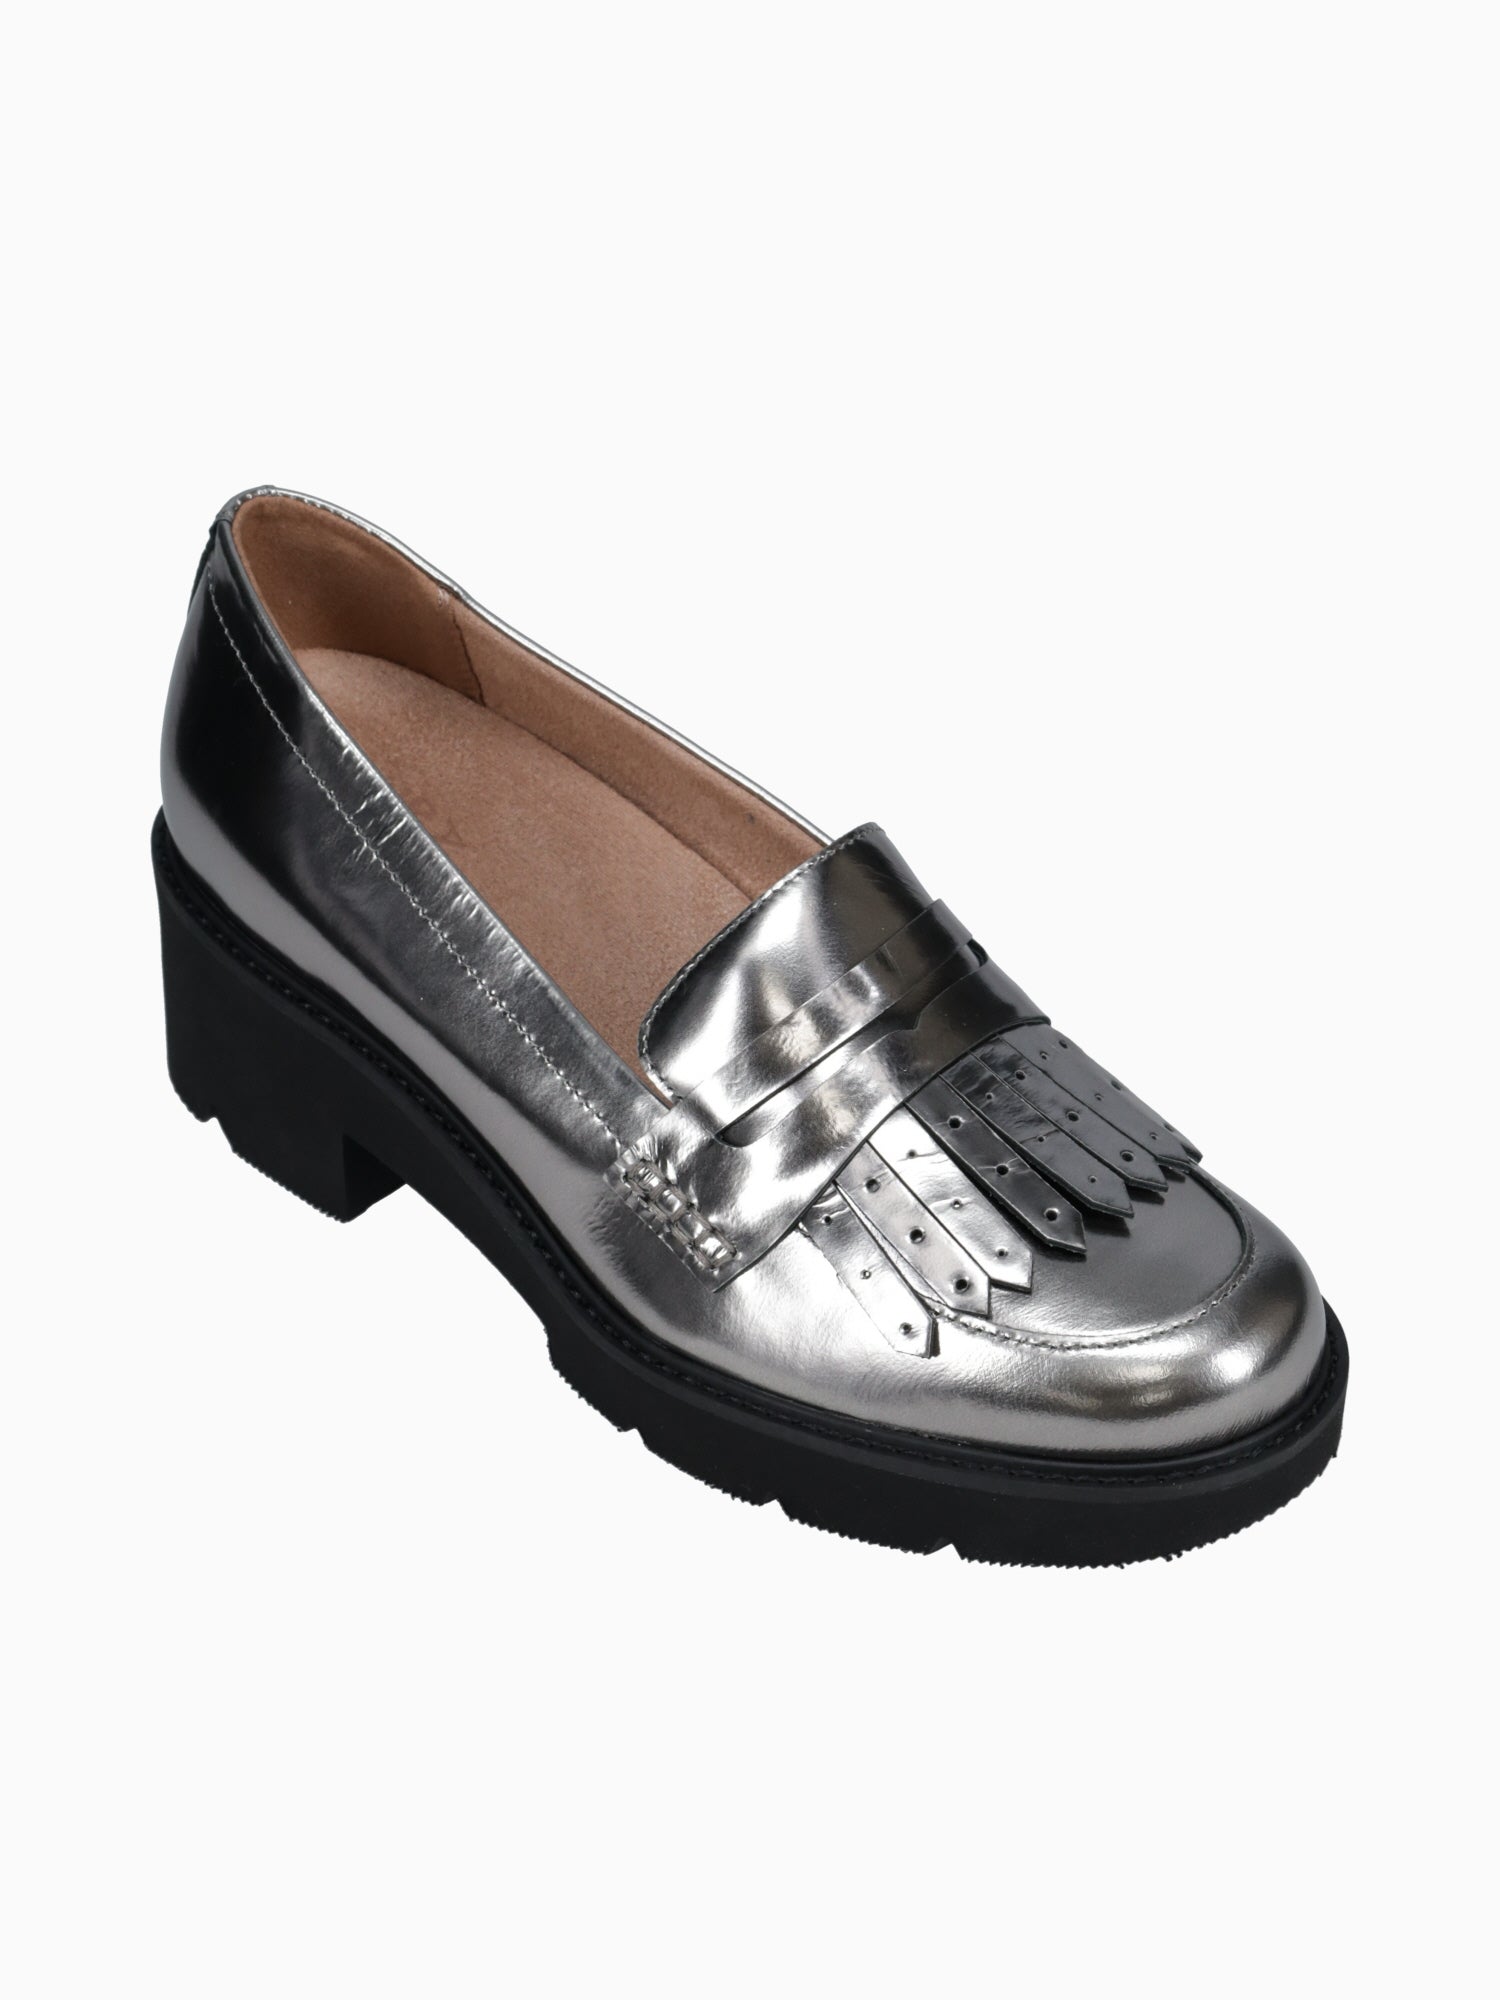 Darcy Pewter Leather Pewter / 5 / M